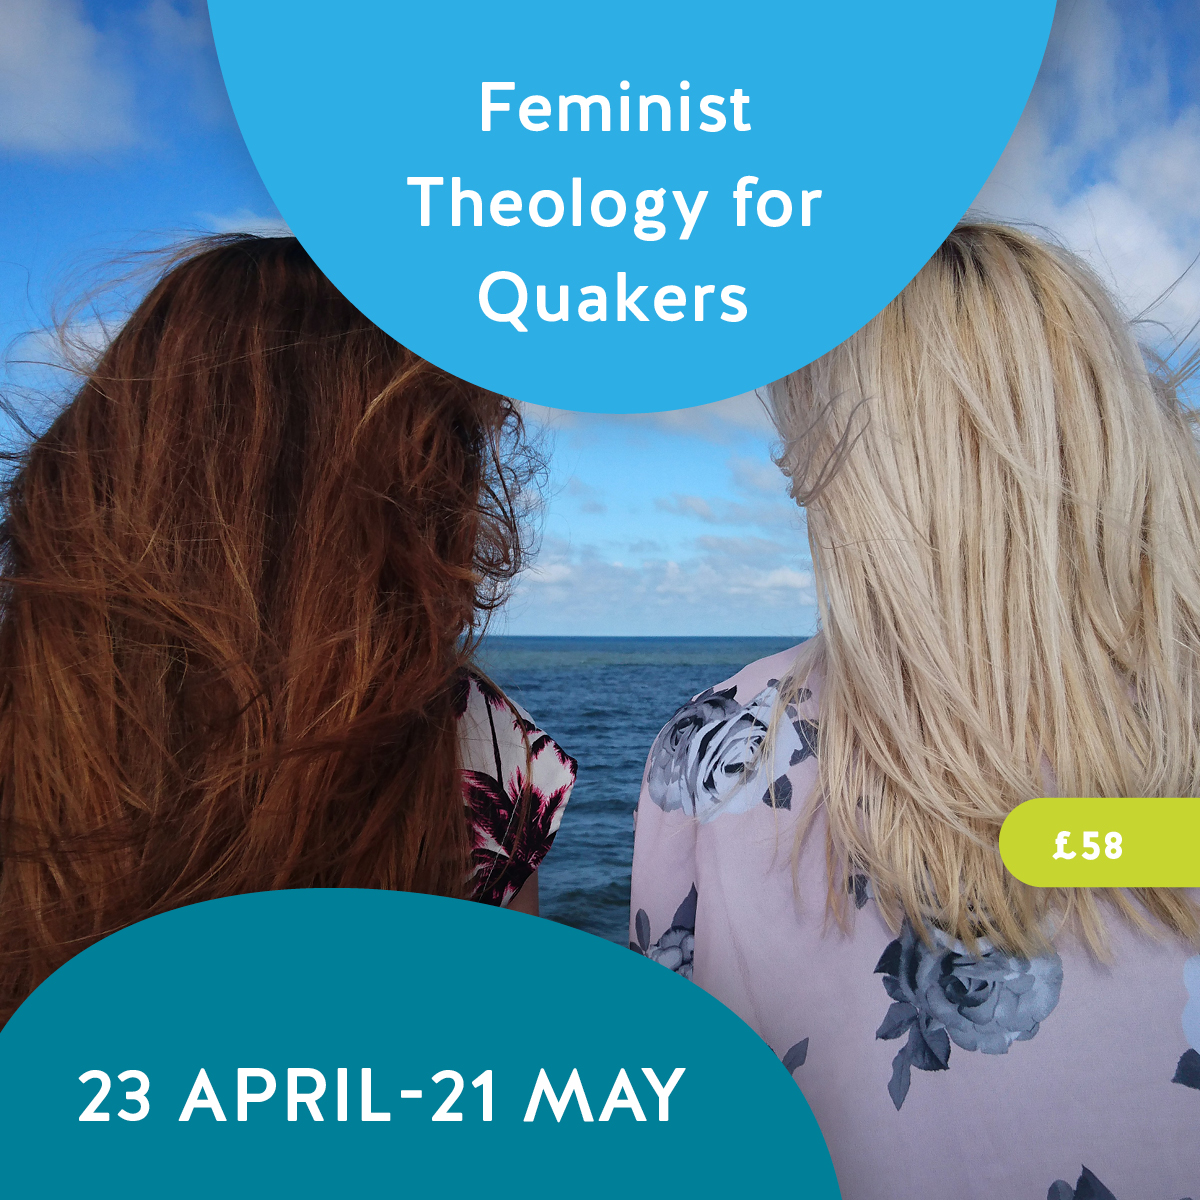 How does the social structure of patriarchy, in which men and masculinity are valued above women and femininity, affect our religion and spirituality? Explore this question with ideas from Christian, Jewish, and Pagan feminist and womanist theologians. See ow.ly/qjaM50QYuRY